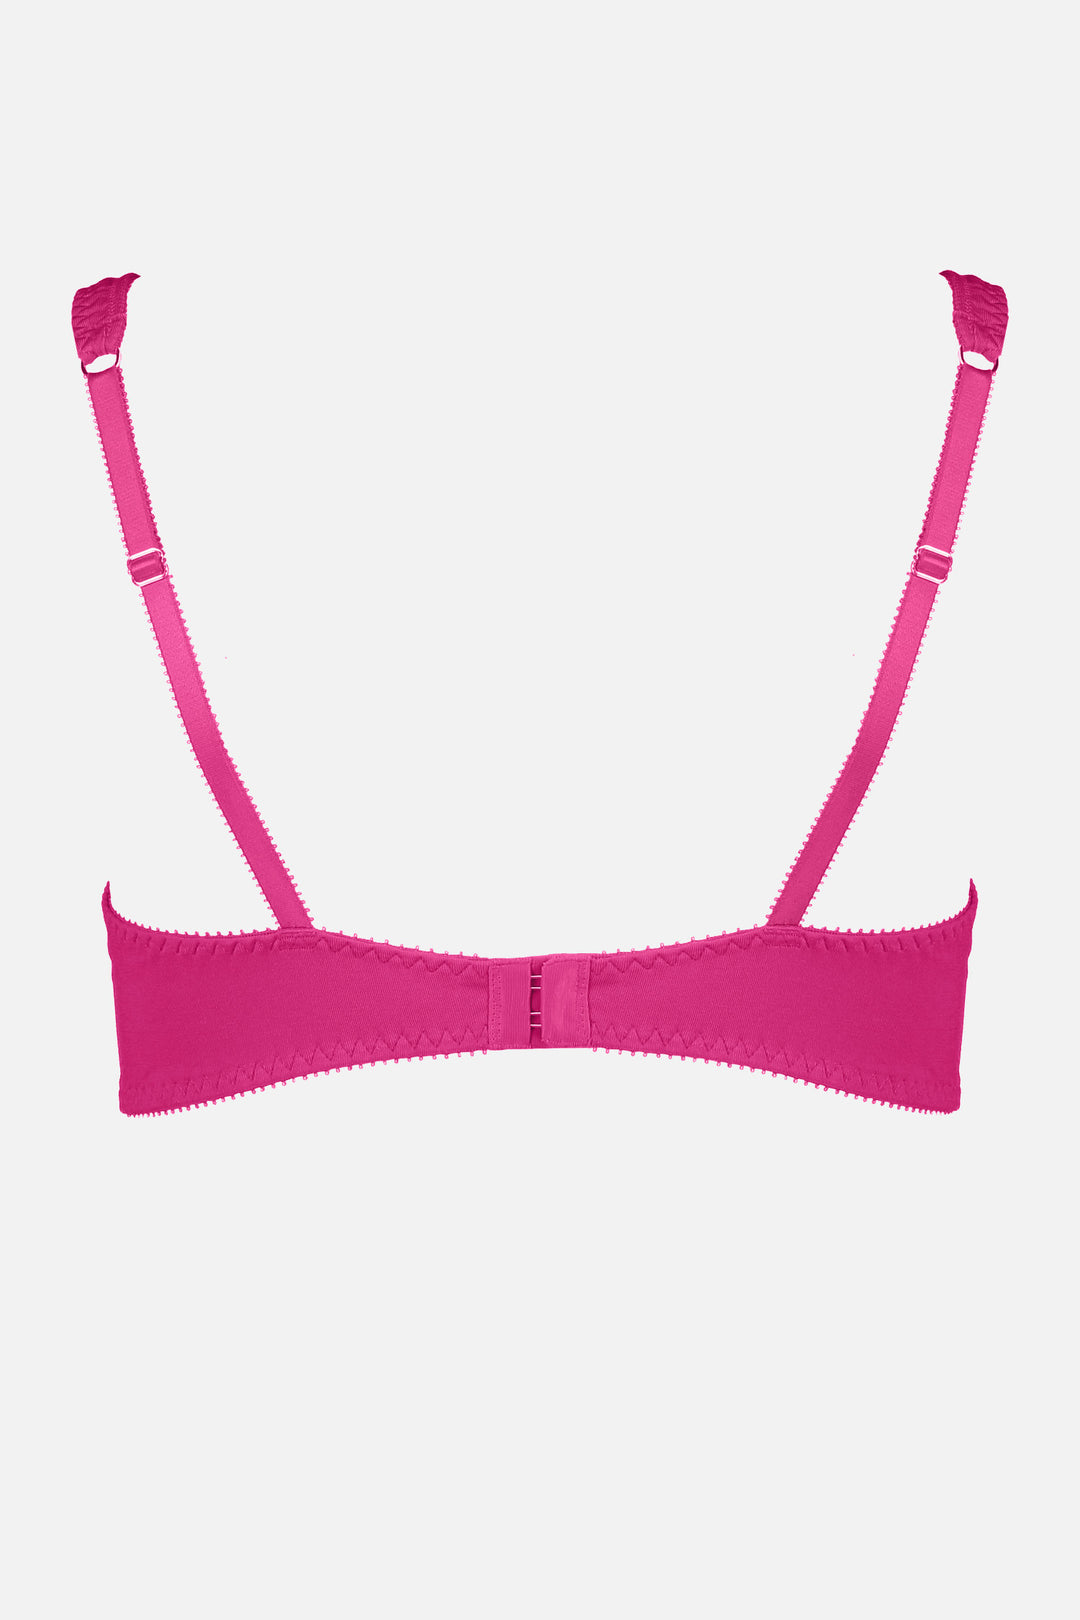 Videris Lingerie Sarah underwire free soft cup bra in magenta TENCEL™ features adjustable back straps and hook and eyes closure